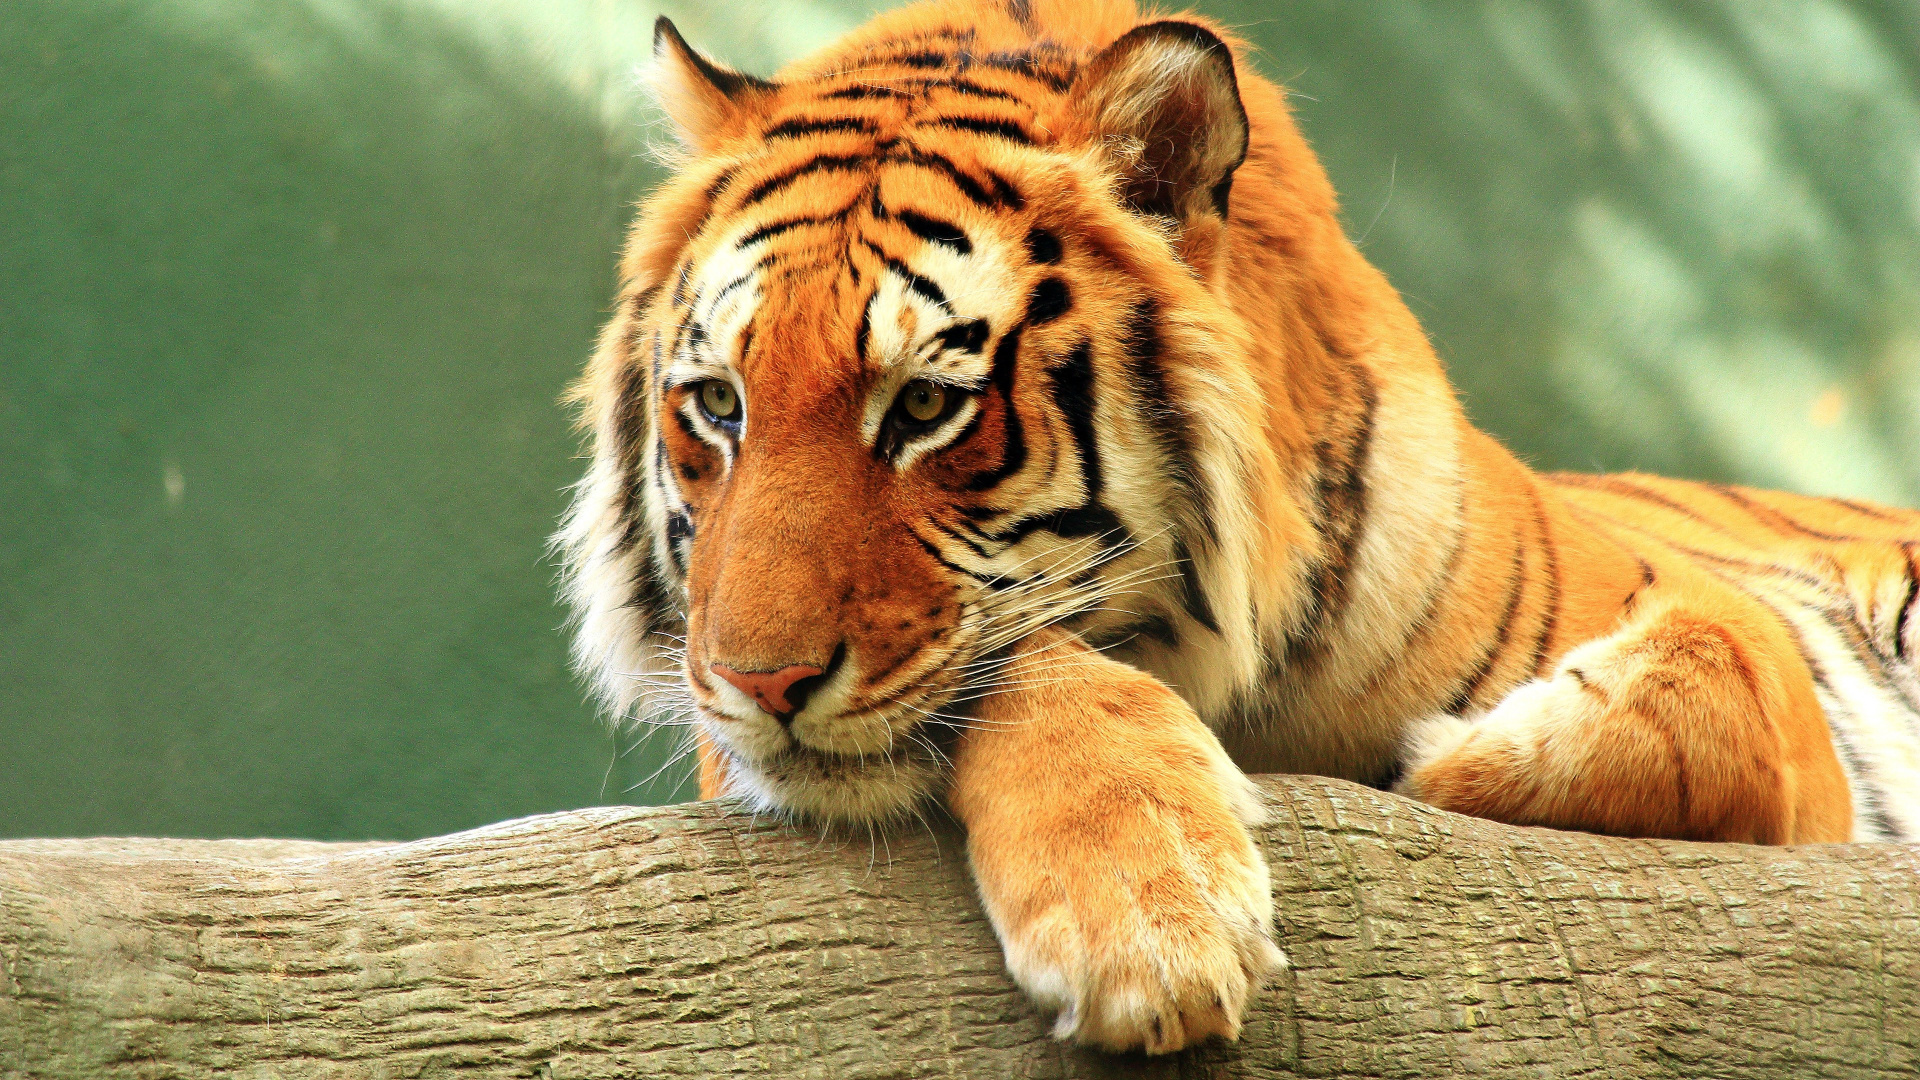 Brown and Black Tiger Lying on Brown Wooden Surface. Wallpaper in 1920x1080 Resolution